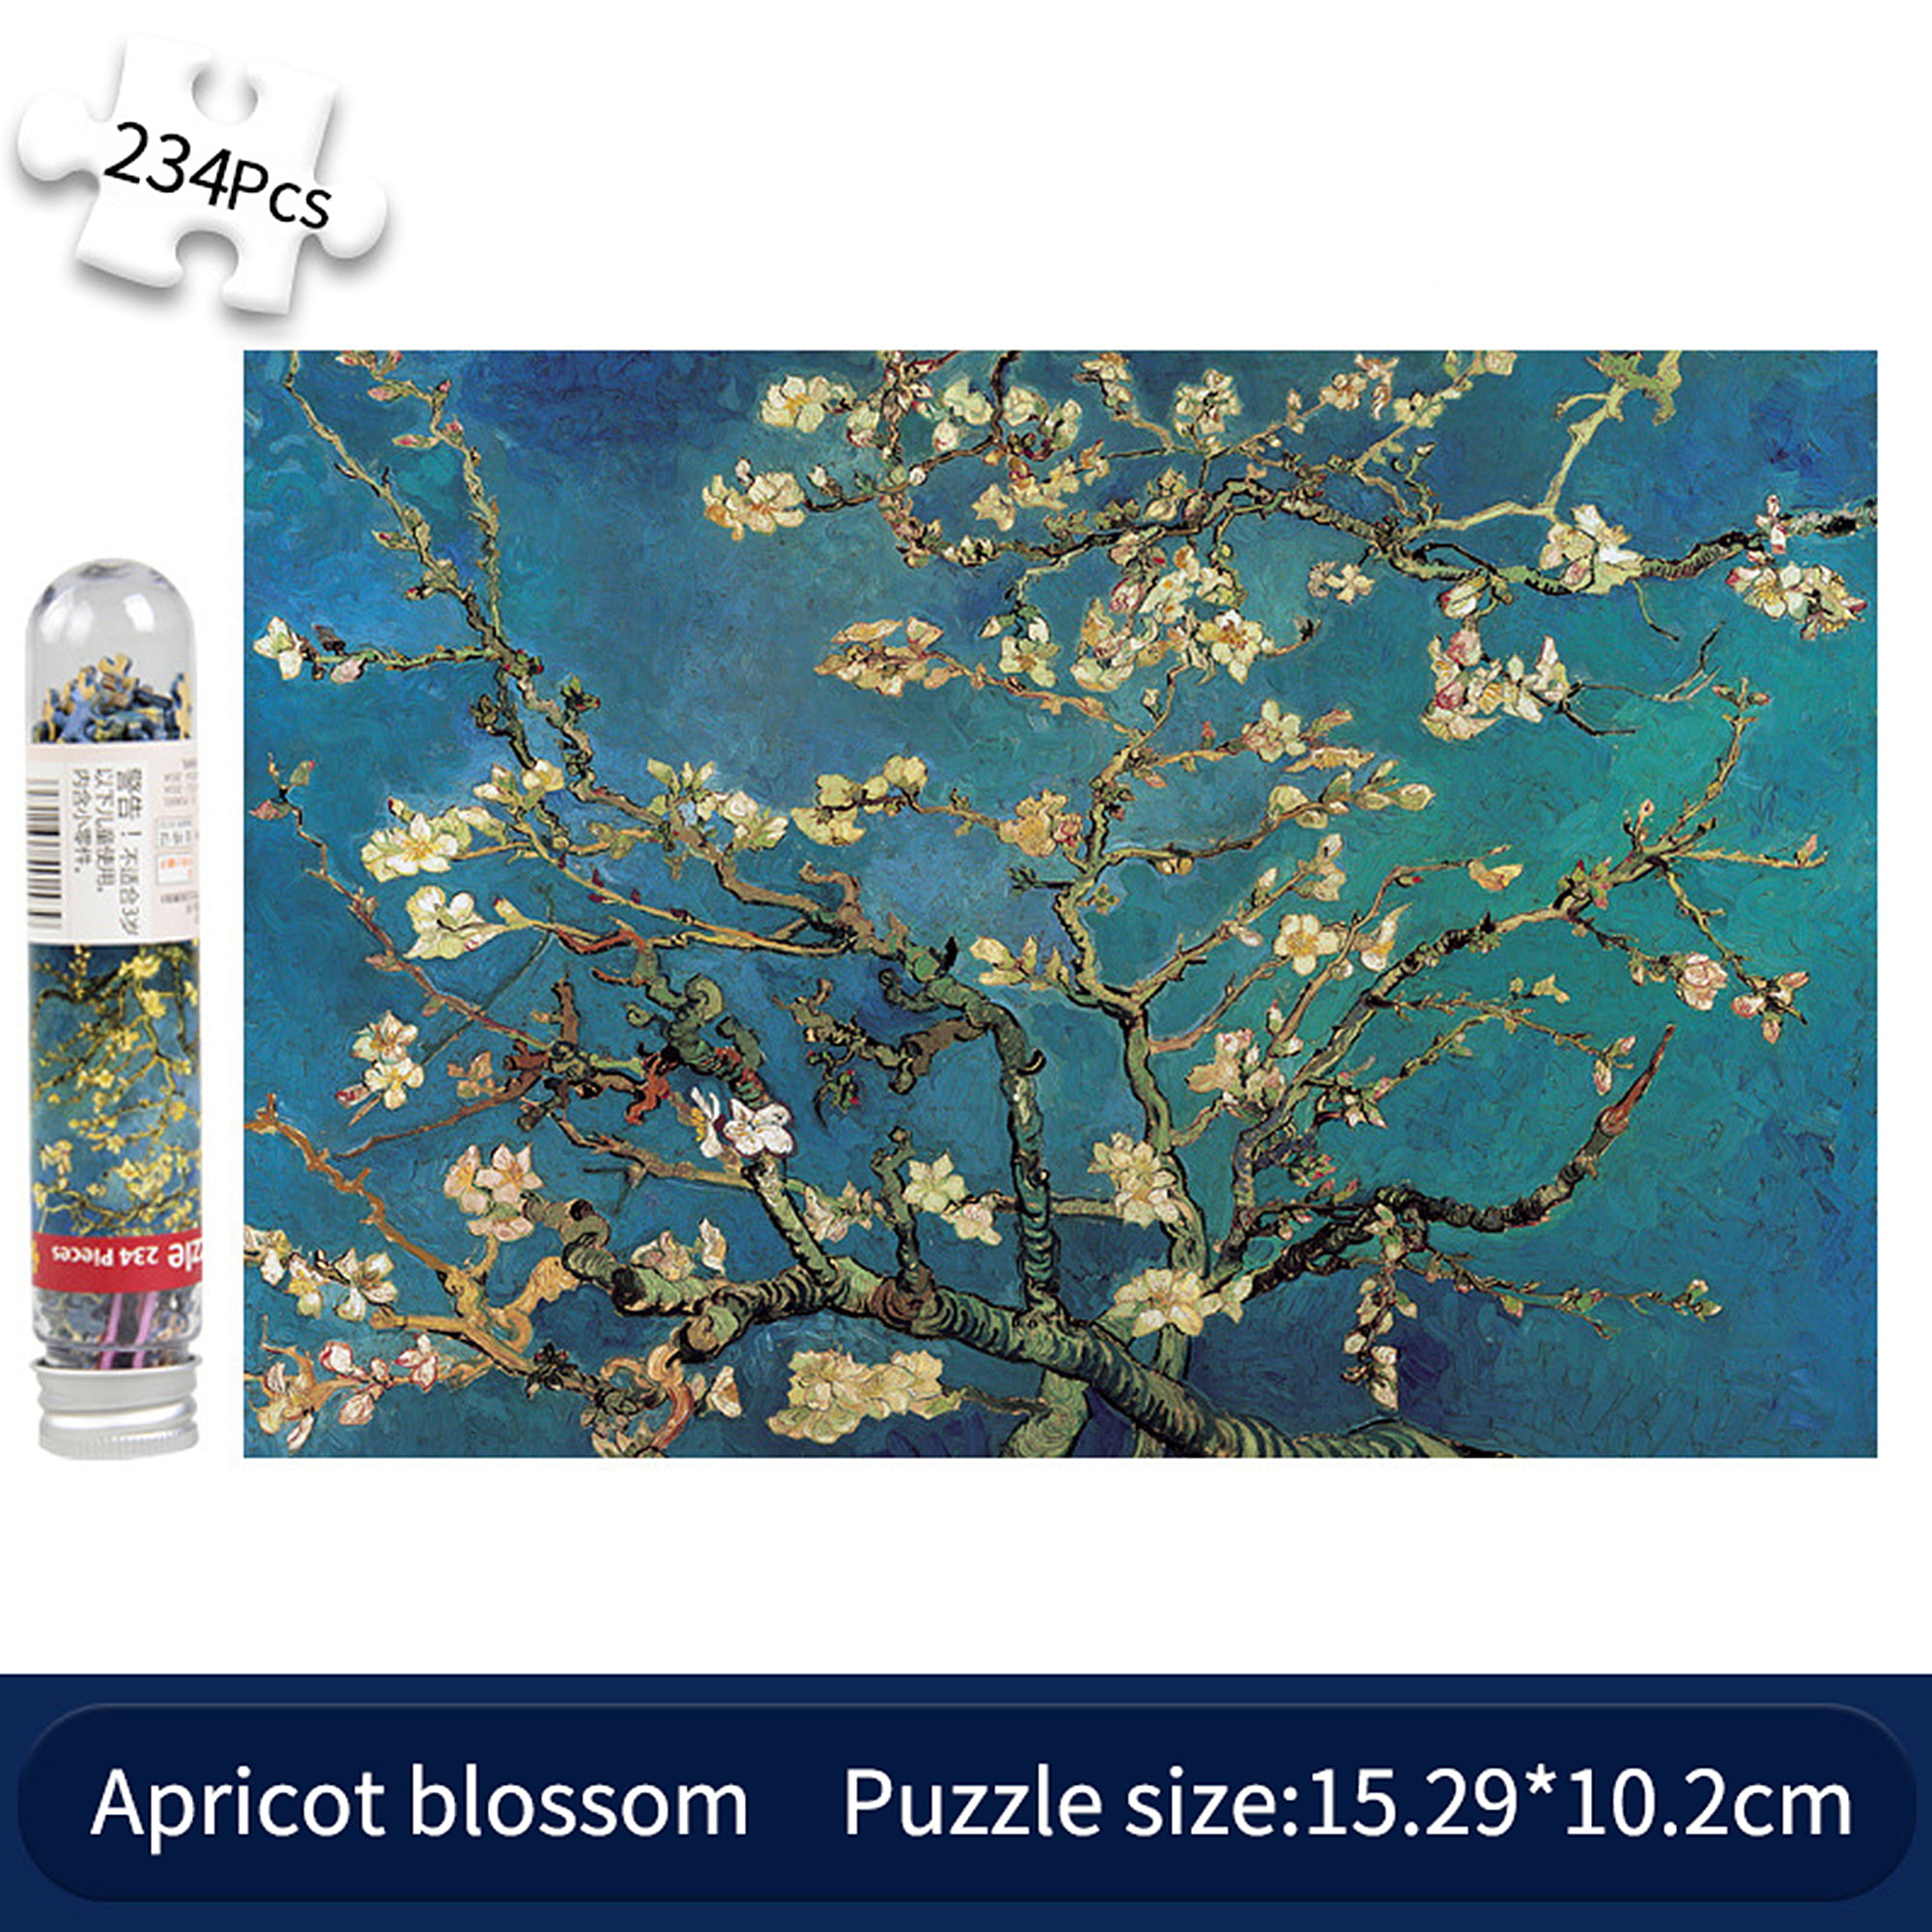 Mini 1000 Pieces Jigsaw Puzzles Apricot Blossom Kids Adult Educational Toy Gifts 